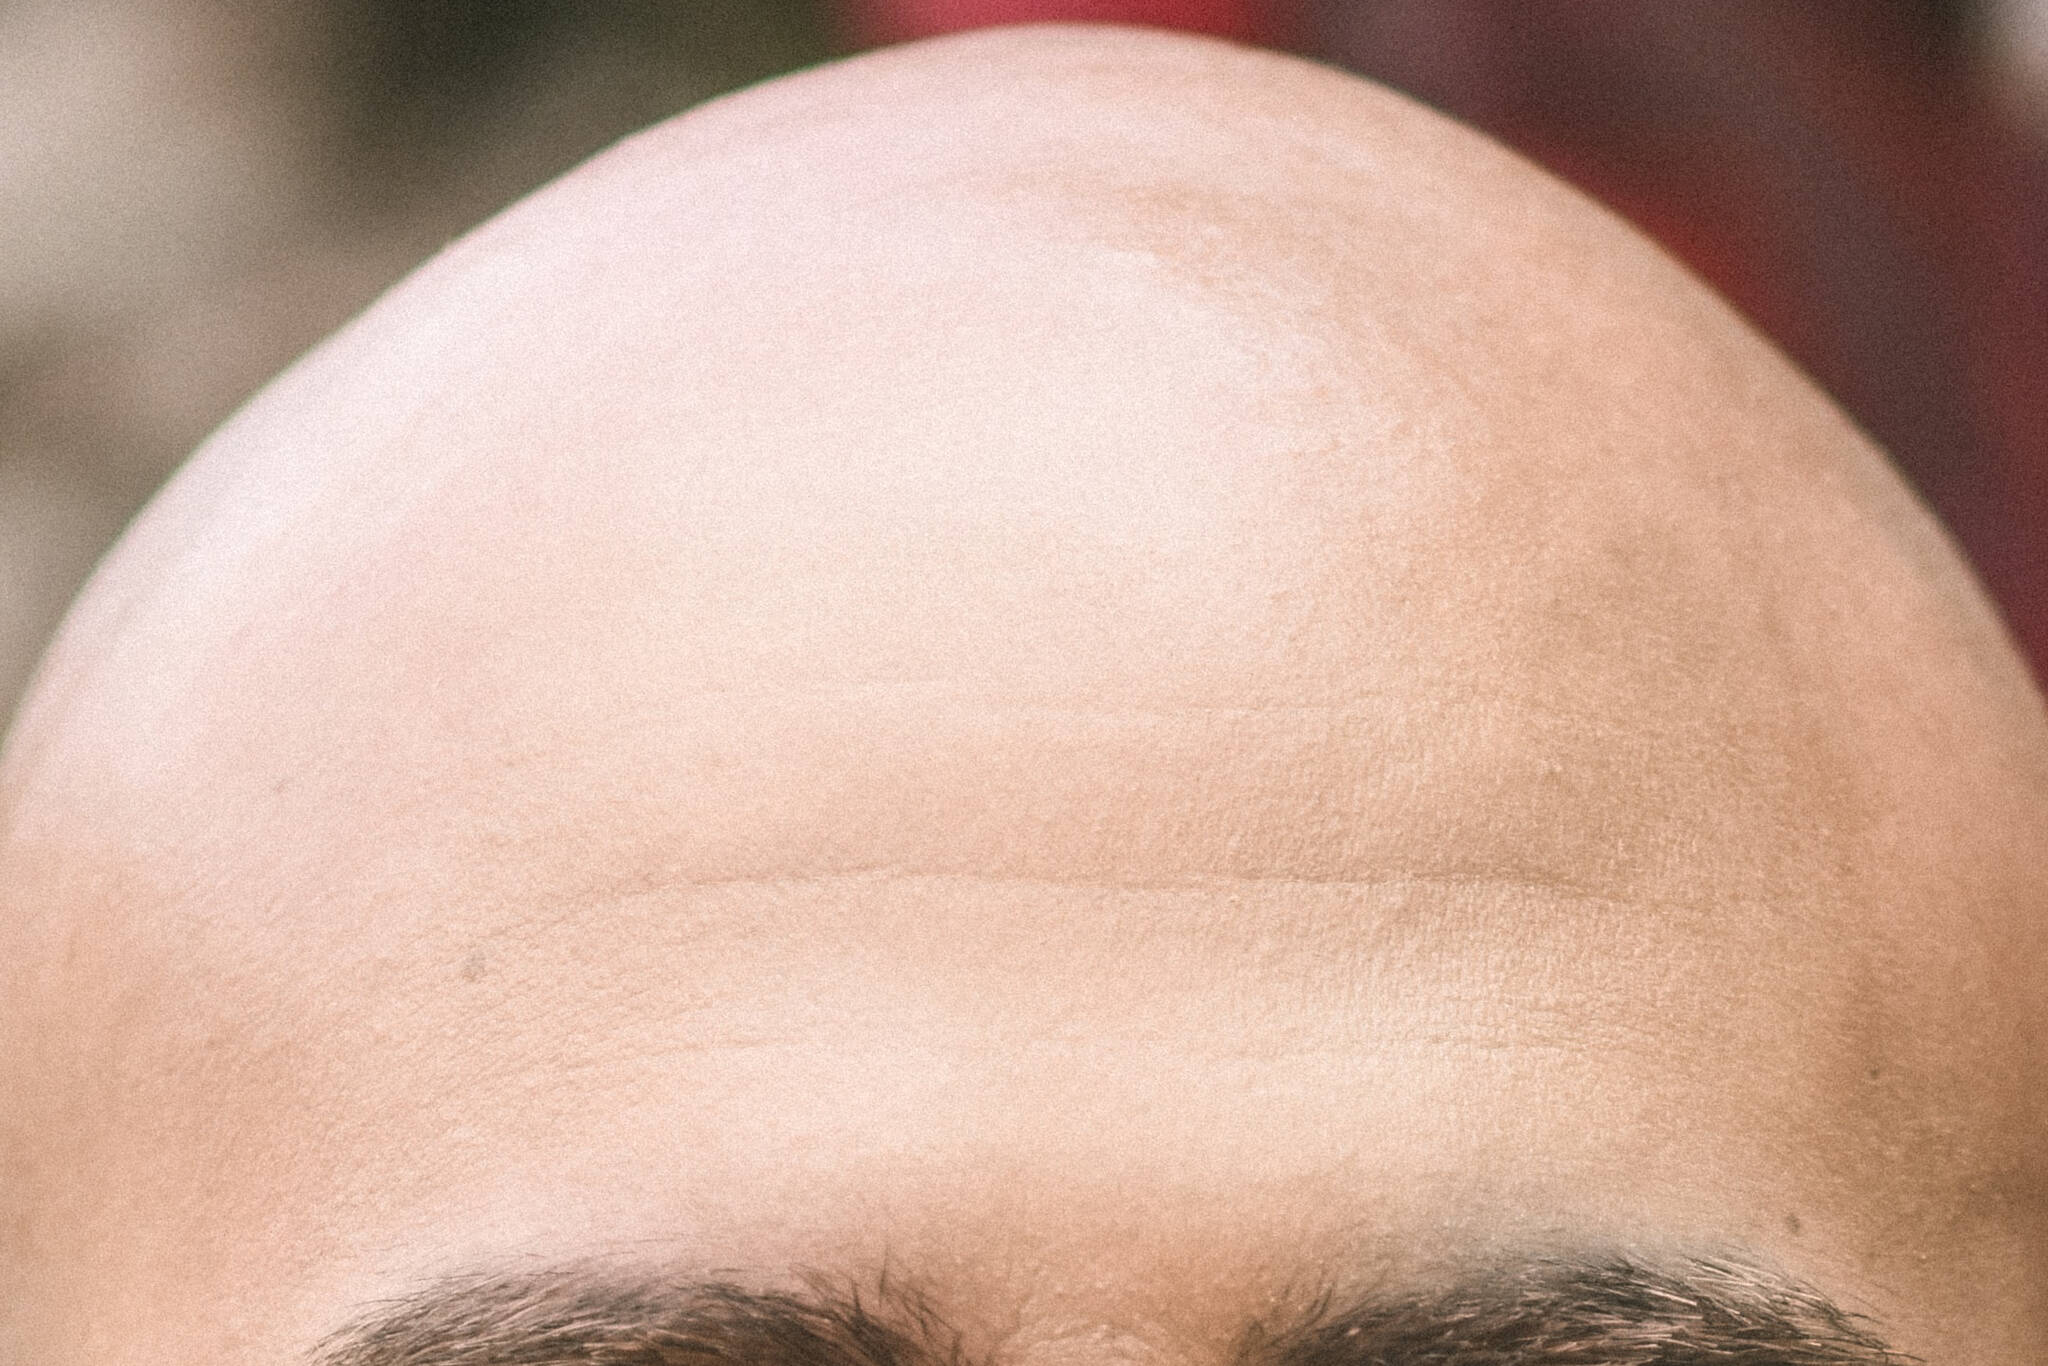 "Bald pride abounds," writes Geoff Kirsch. "In fact, a Bald Men Club of Japan holds an annual Bald Man Competition. In this Olympic-style international tournament, two men stick suction cups to their heads, attached to a single red rope, and then attempt to pull off their opponent’s cup, tug-of-war style. Better start training for next year; I wonder what the rules say about Spider Tack…" (Unsplash /  Chalo Garcia)